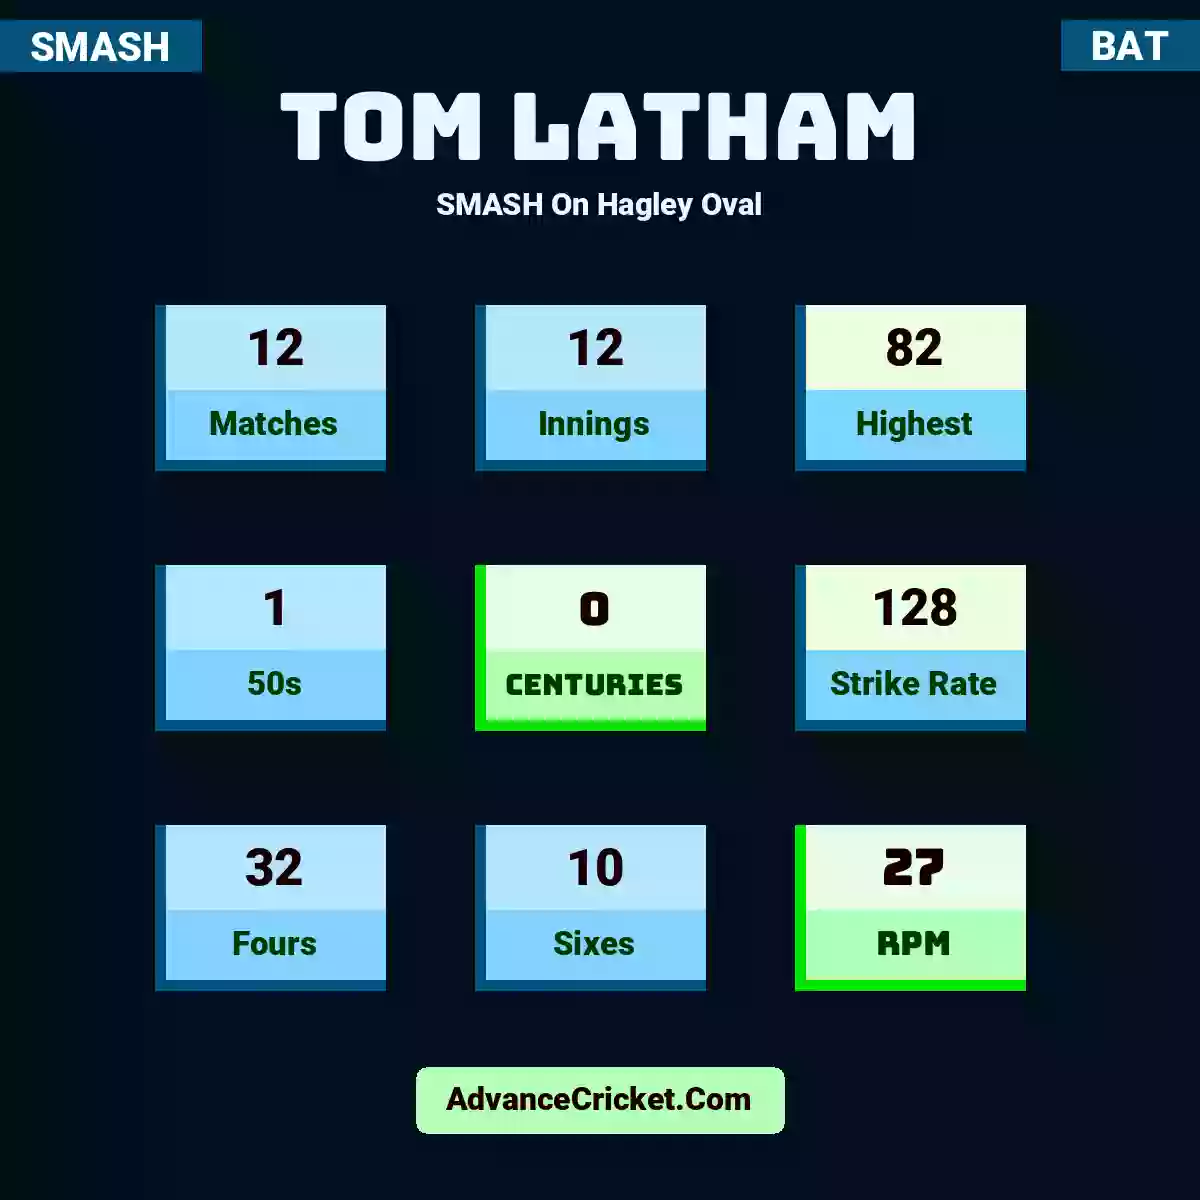 Tom Latham SMASH  On Hagley Oval, Tom Latham played 12 matches, scored 82 runs as highest, 1 half-centuries, and 0 centuries, with a strike rate of 128. T.Latham hit 32 fours and 10 sixes, with an RPM of 27.